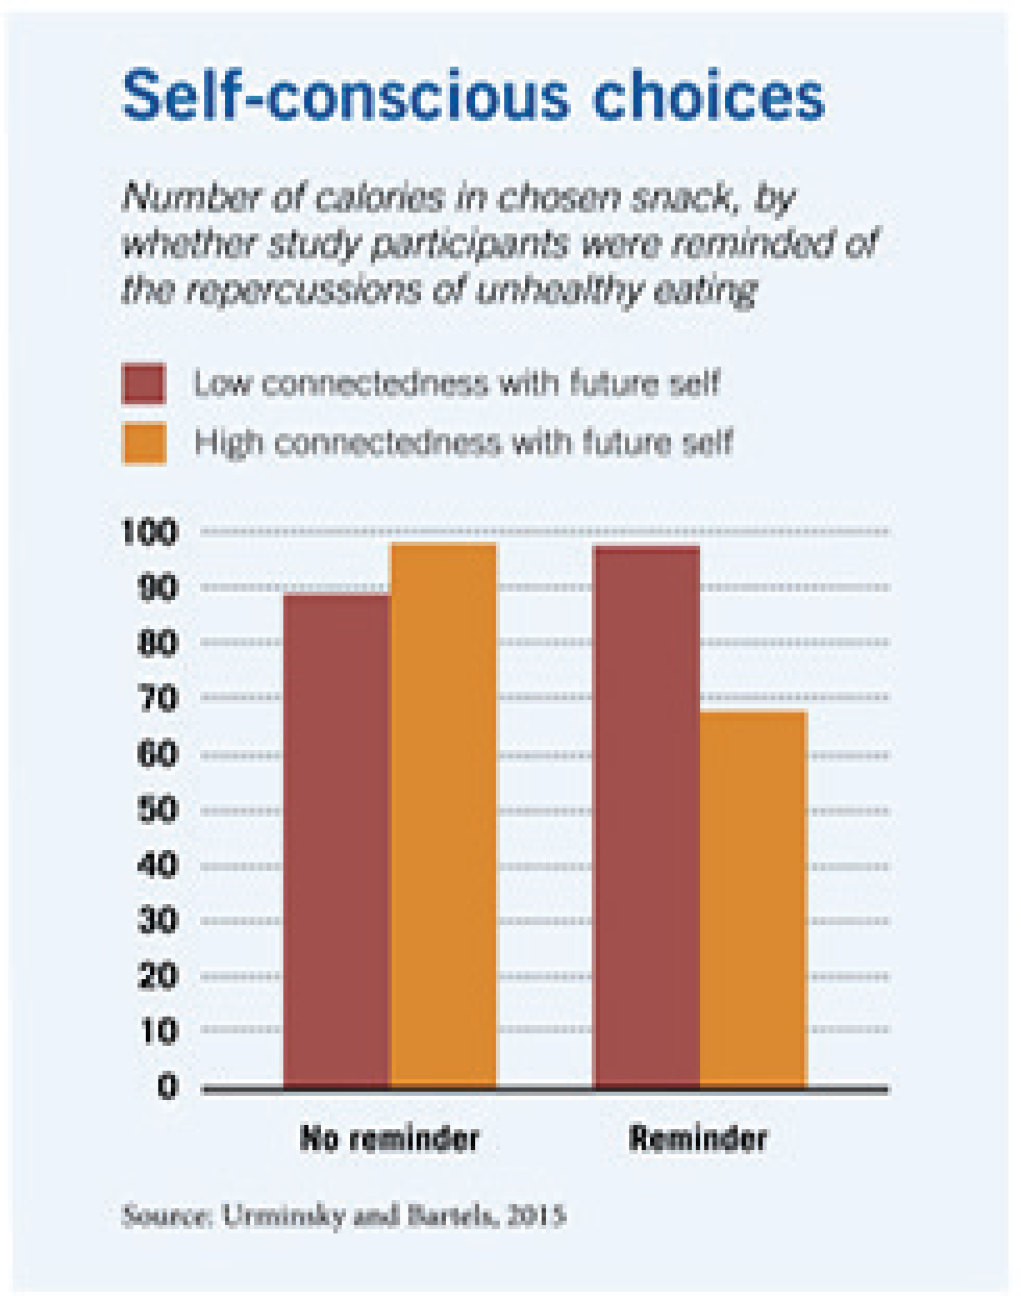 A bar chart plotting the number of calories in a snack chosen by study participants. When they had not been reminded about the repercussions of unhealthy eating, those with low connectedness with their future self chose a snack with a calorie count in the high eighties, while those with high connectedness to their future self chose one with a calorie count in the high nineties. When they had been reminded, those with low connectedness chose snacks with calories in the high nineties, and those with high connectedness chose something with a calorie count below seventy.